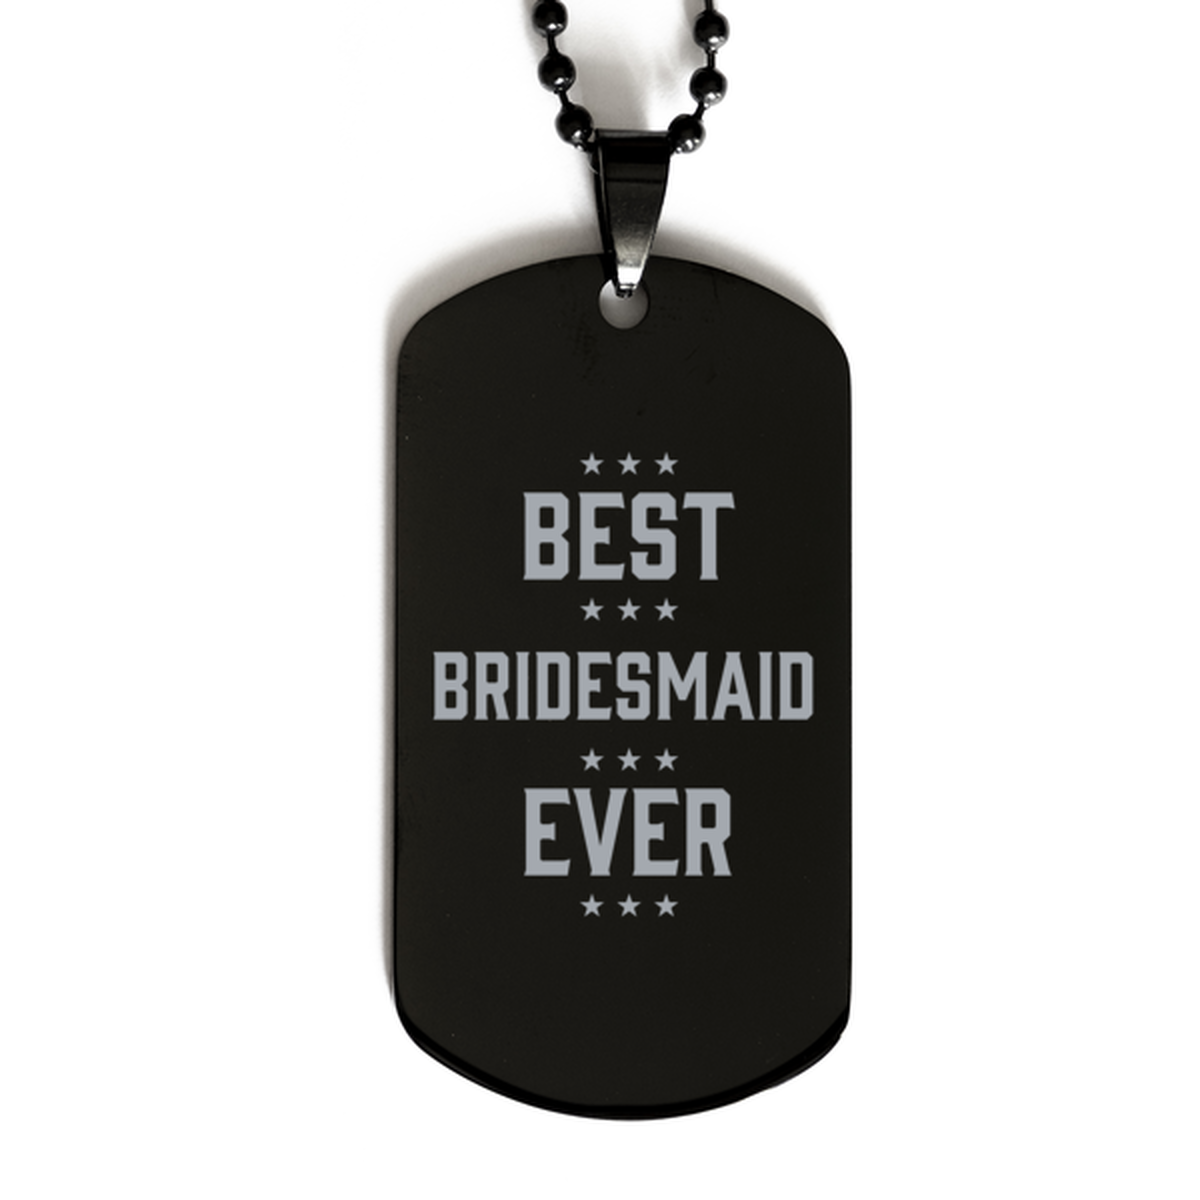 Best Bridemaid Ever Bridemaid Gifts, Funny Black Dog Tag For Bridemaid, Birthday Family Presents Engraved Necklace For Women